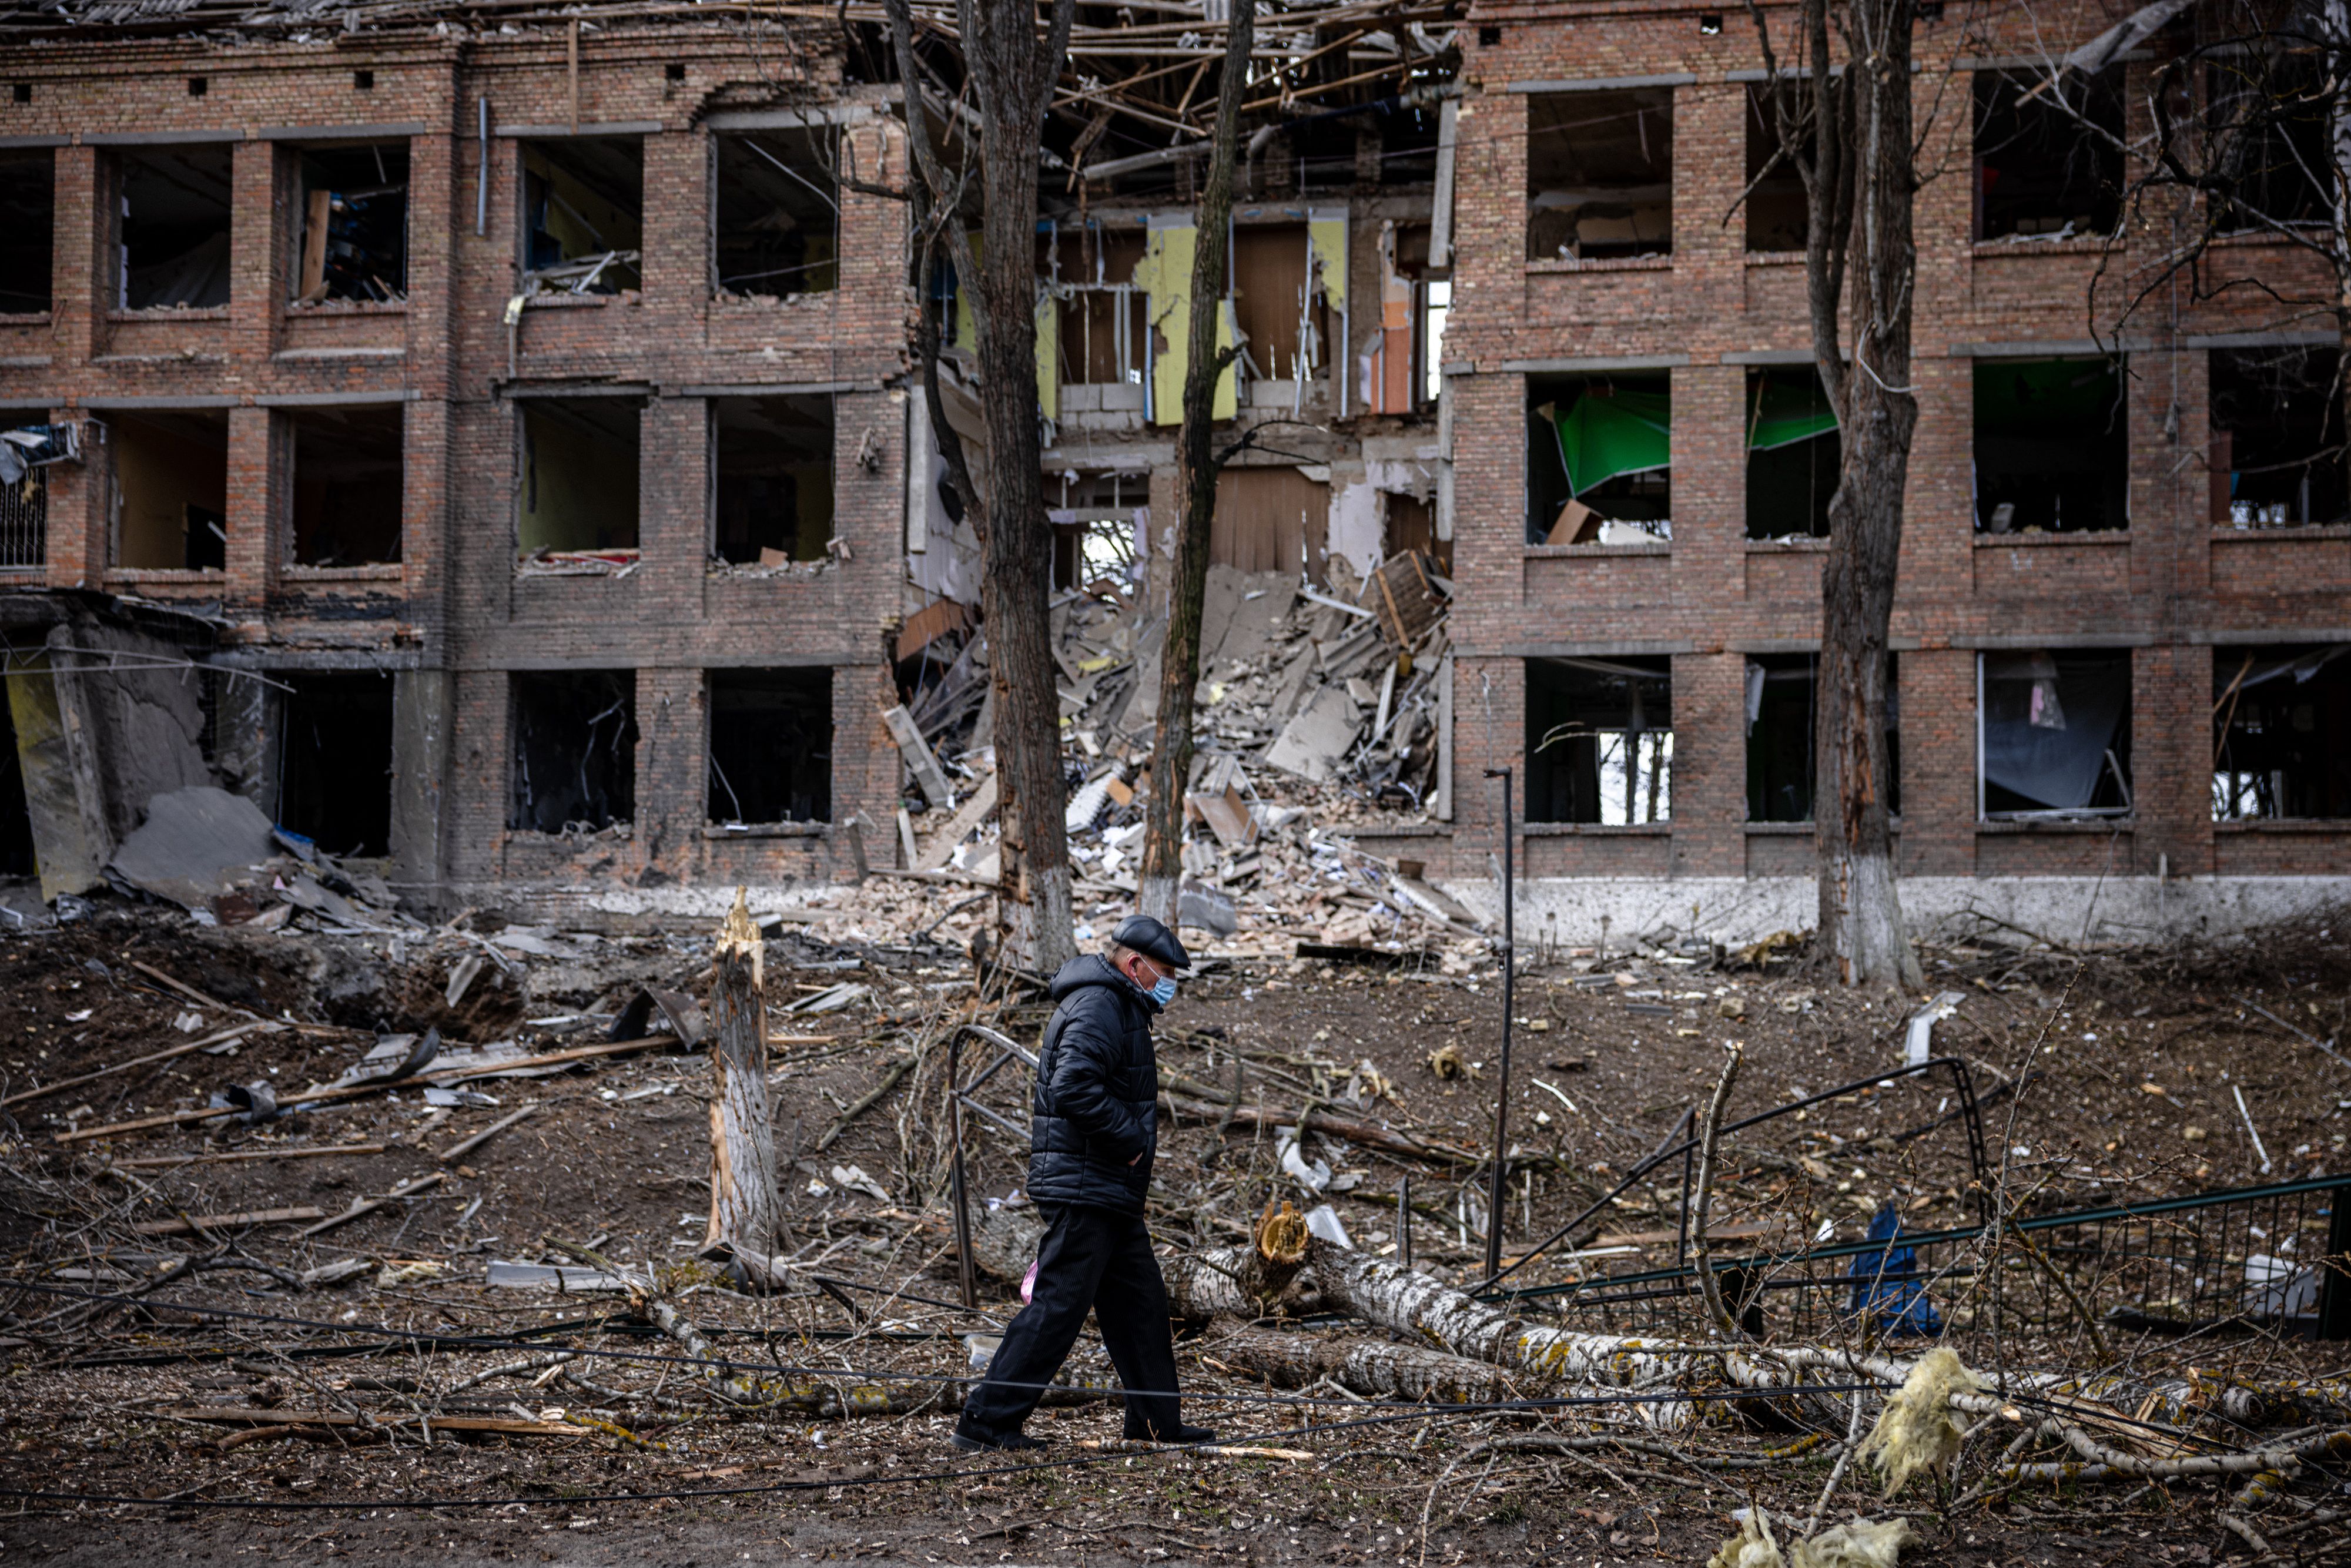 'War crimes' committed by Russian forces, Ukrainians aged 4 to 82 were targeted